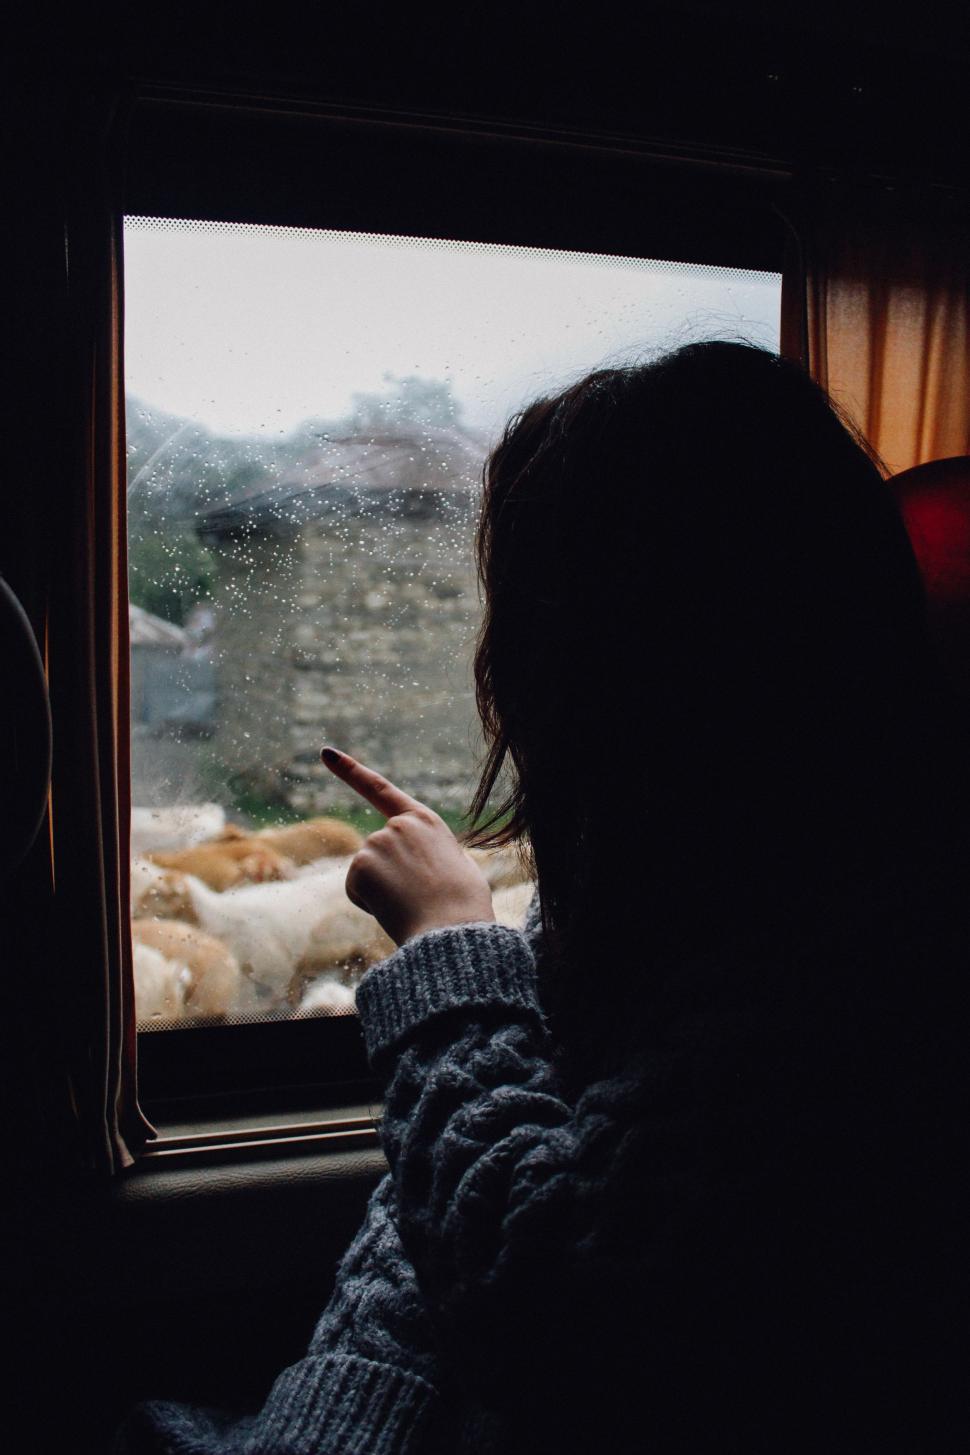 Free Image of Woman Observing Herd of Cows Through Window 